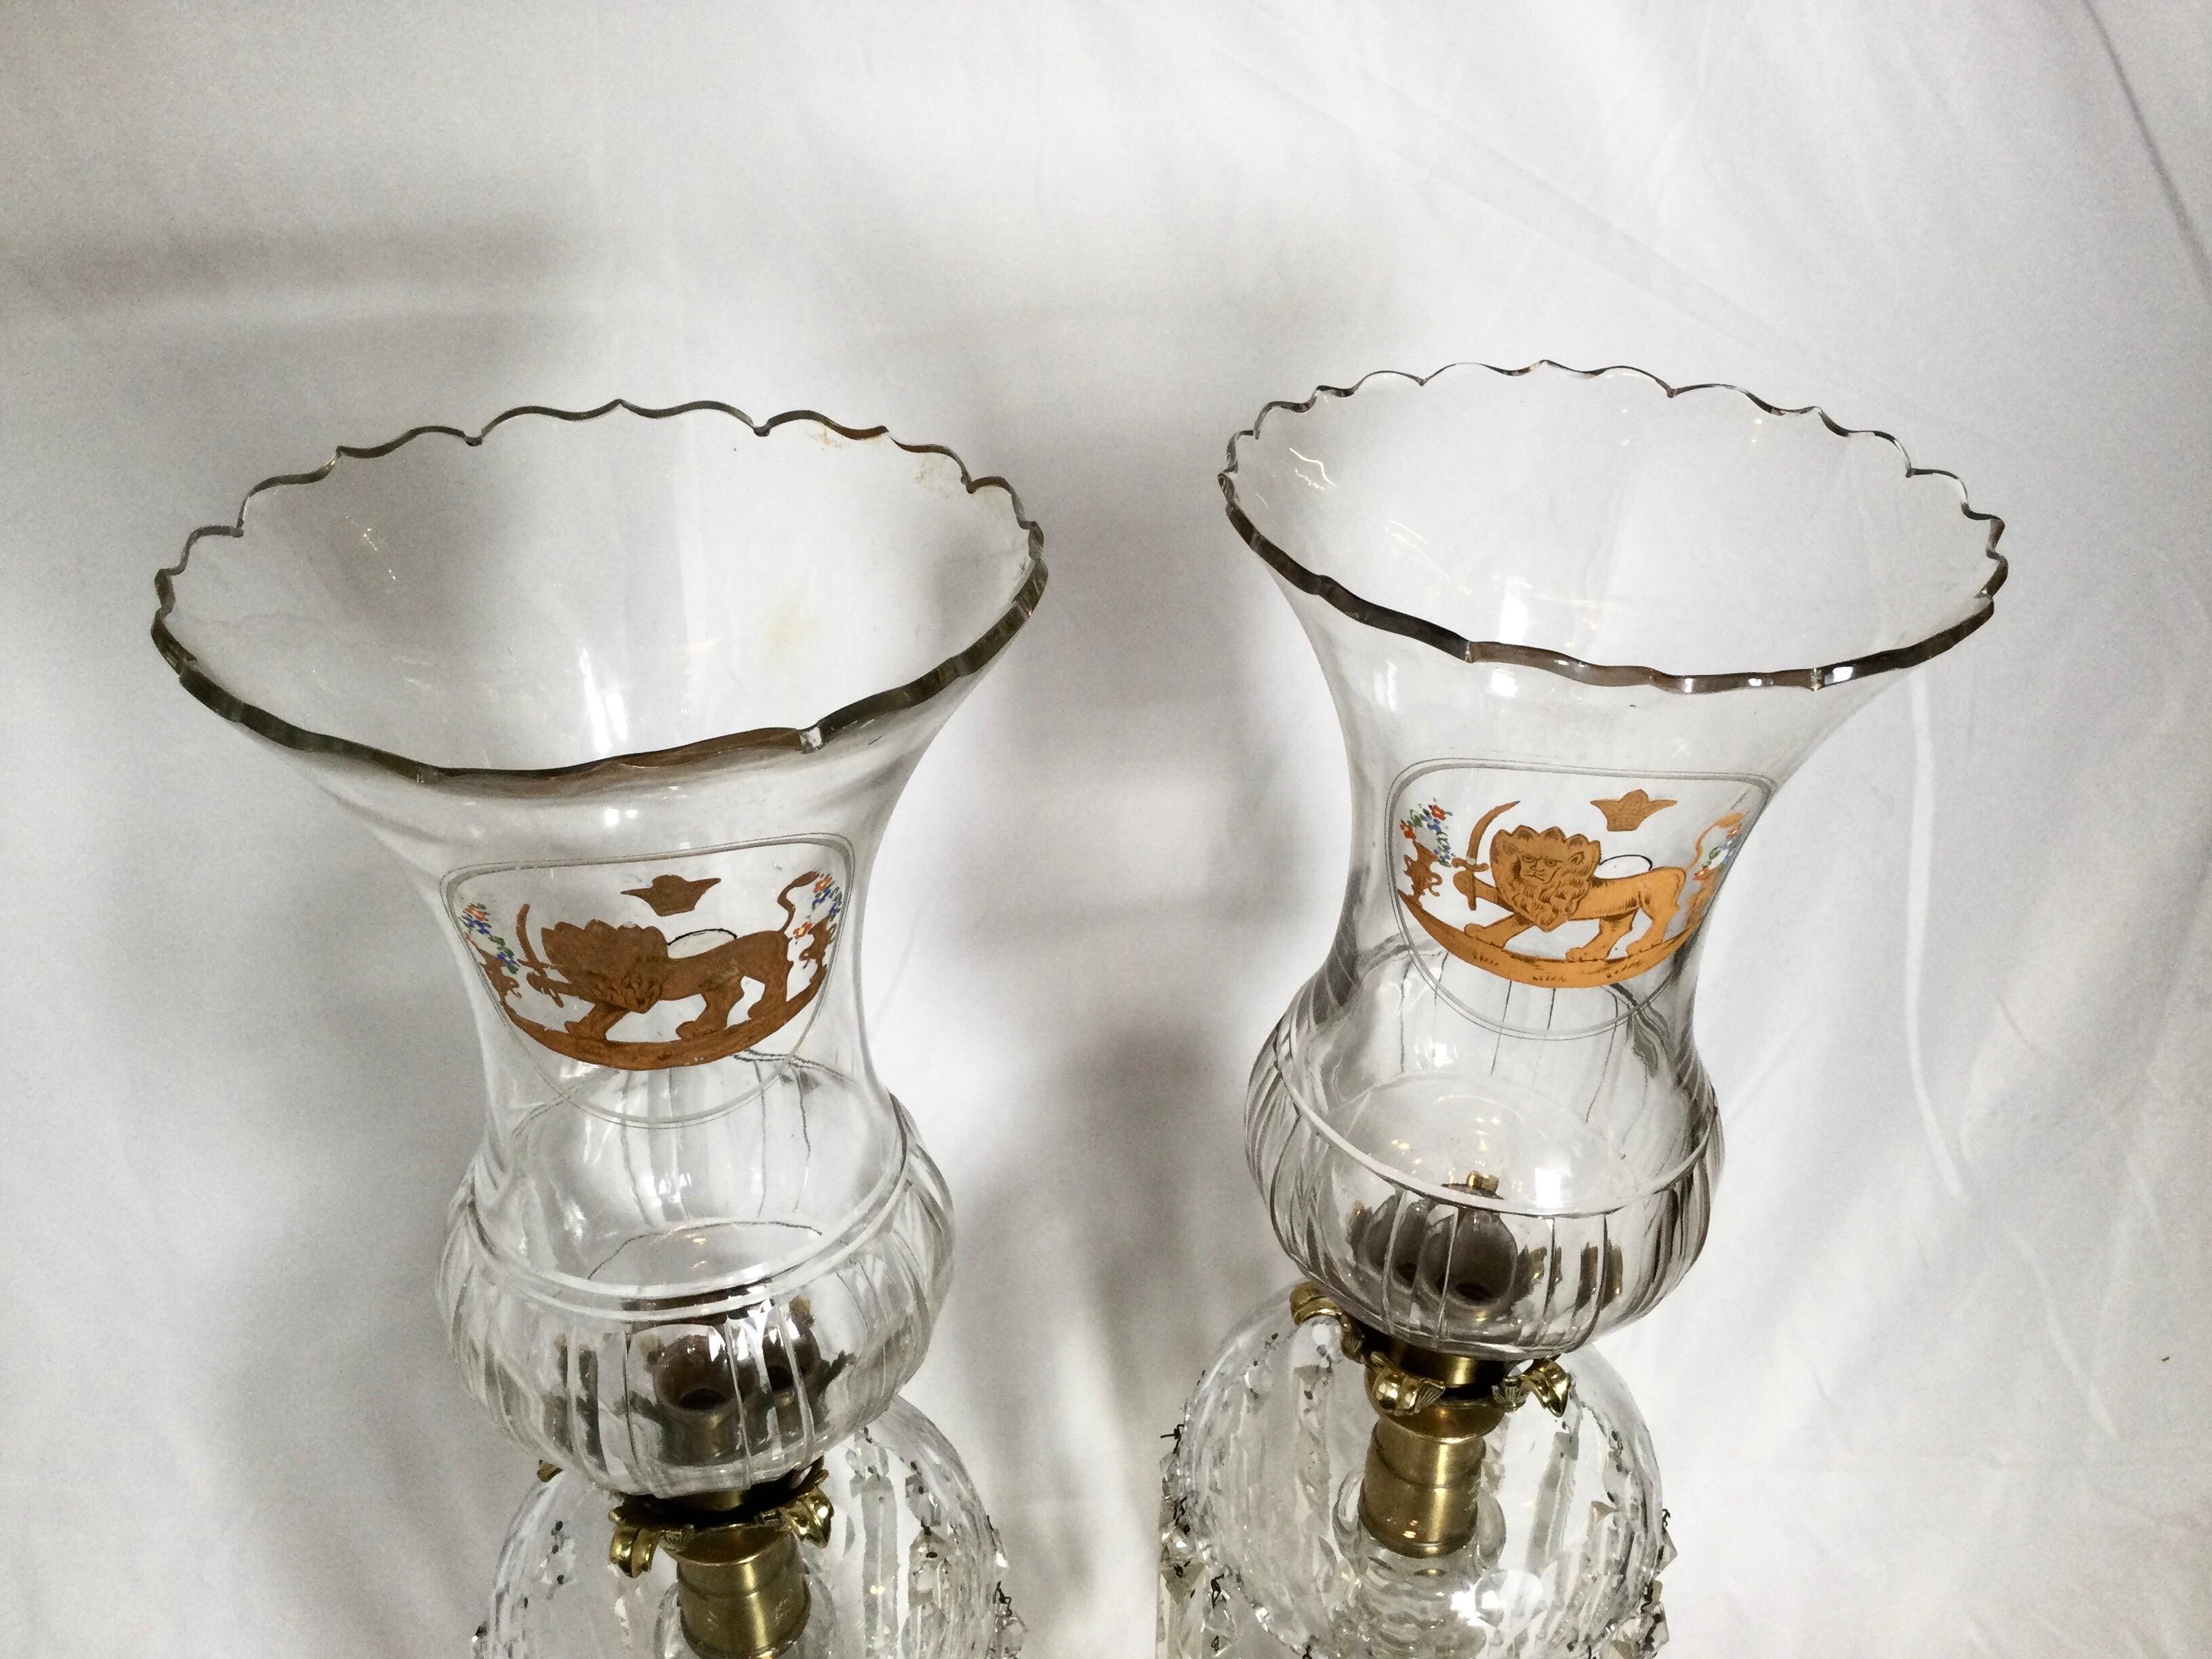 American Pair of Cut Glass Hurricane Candlesticks with Lion Decoration